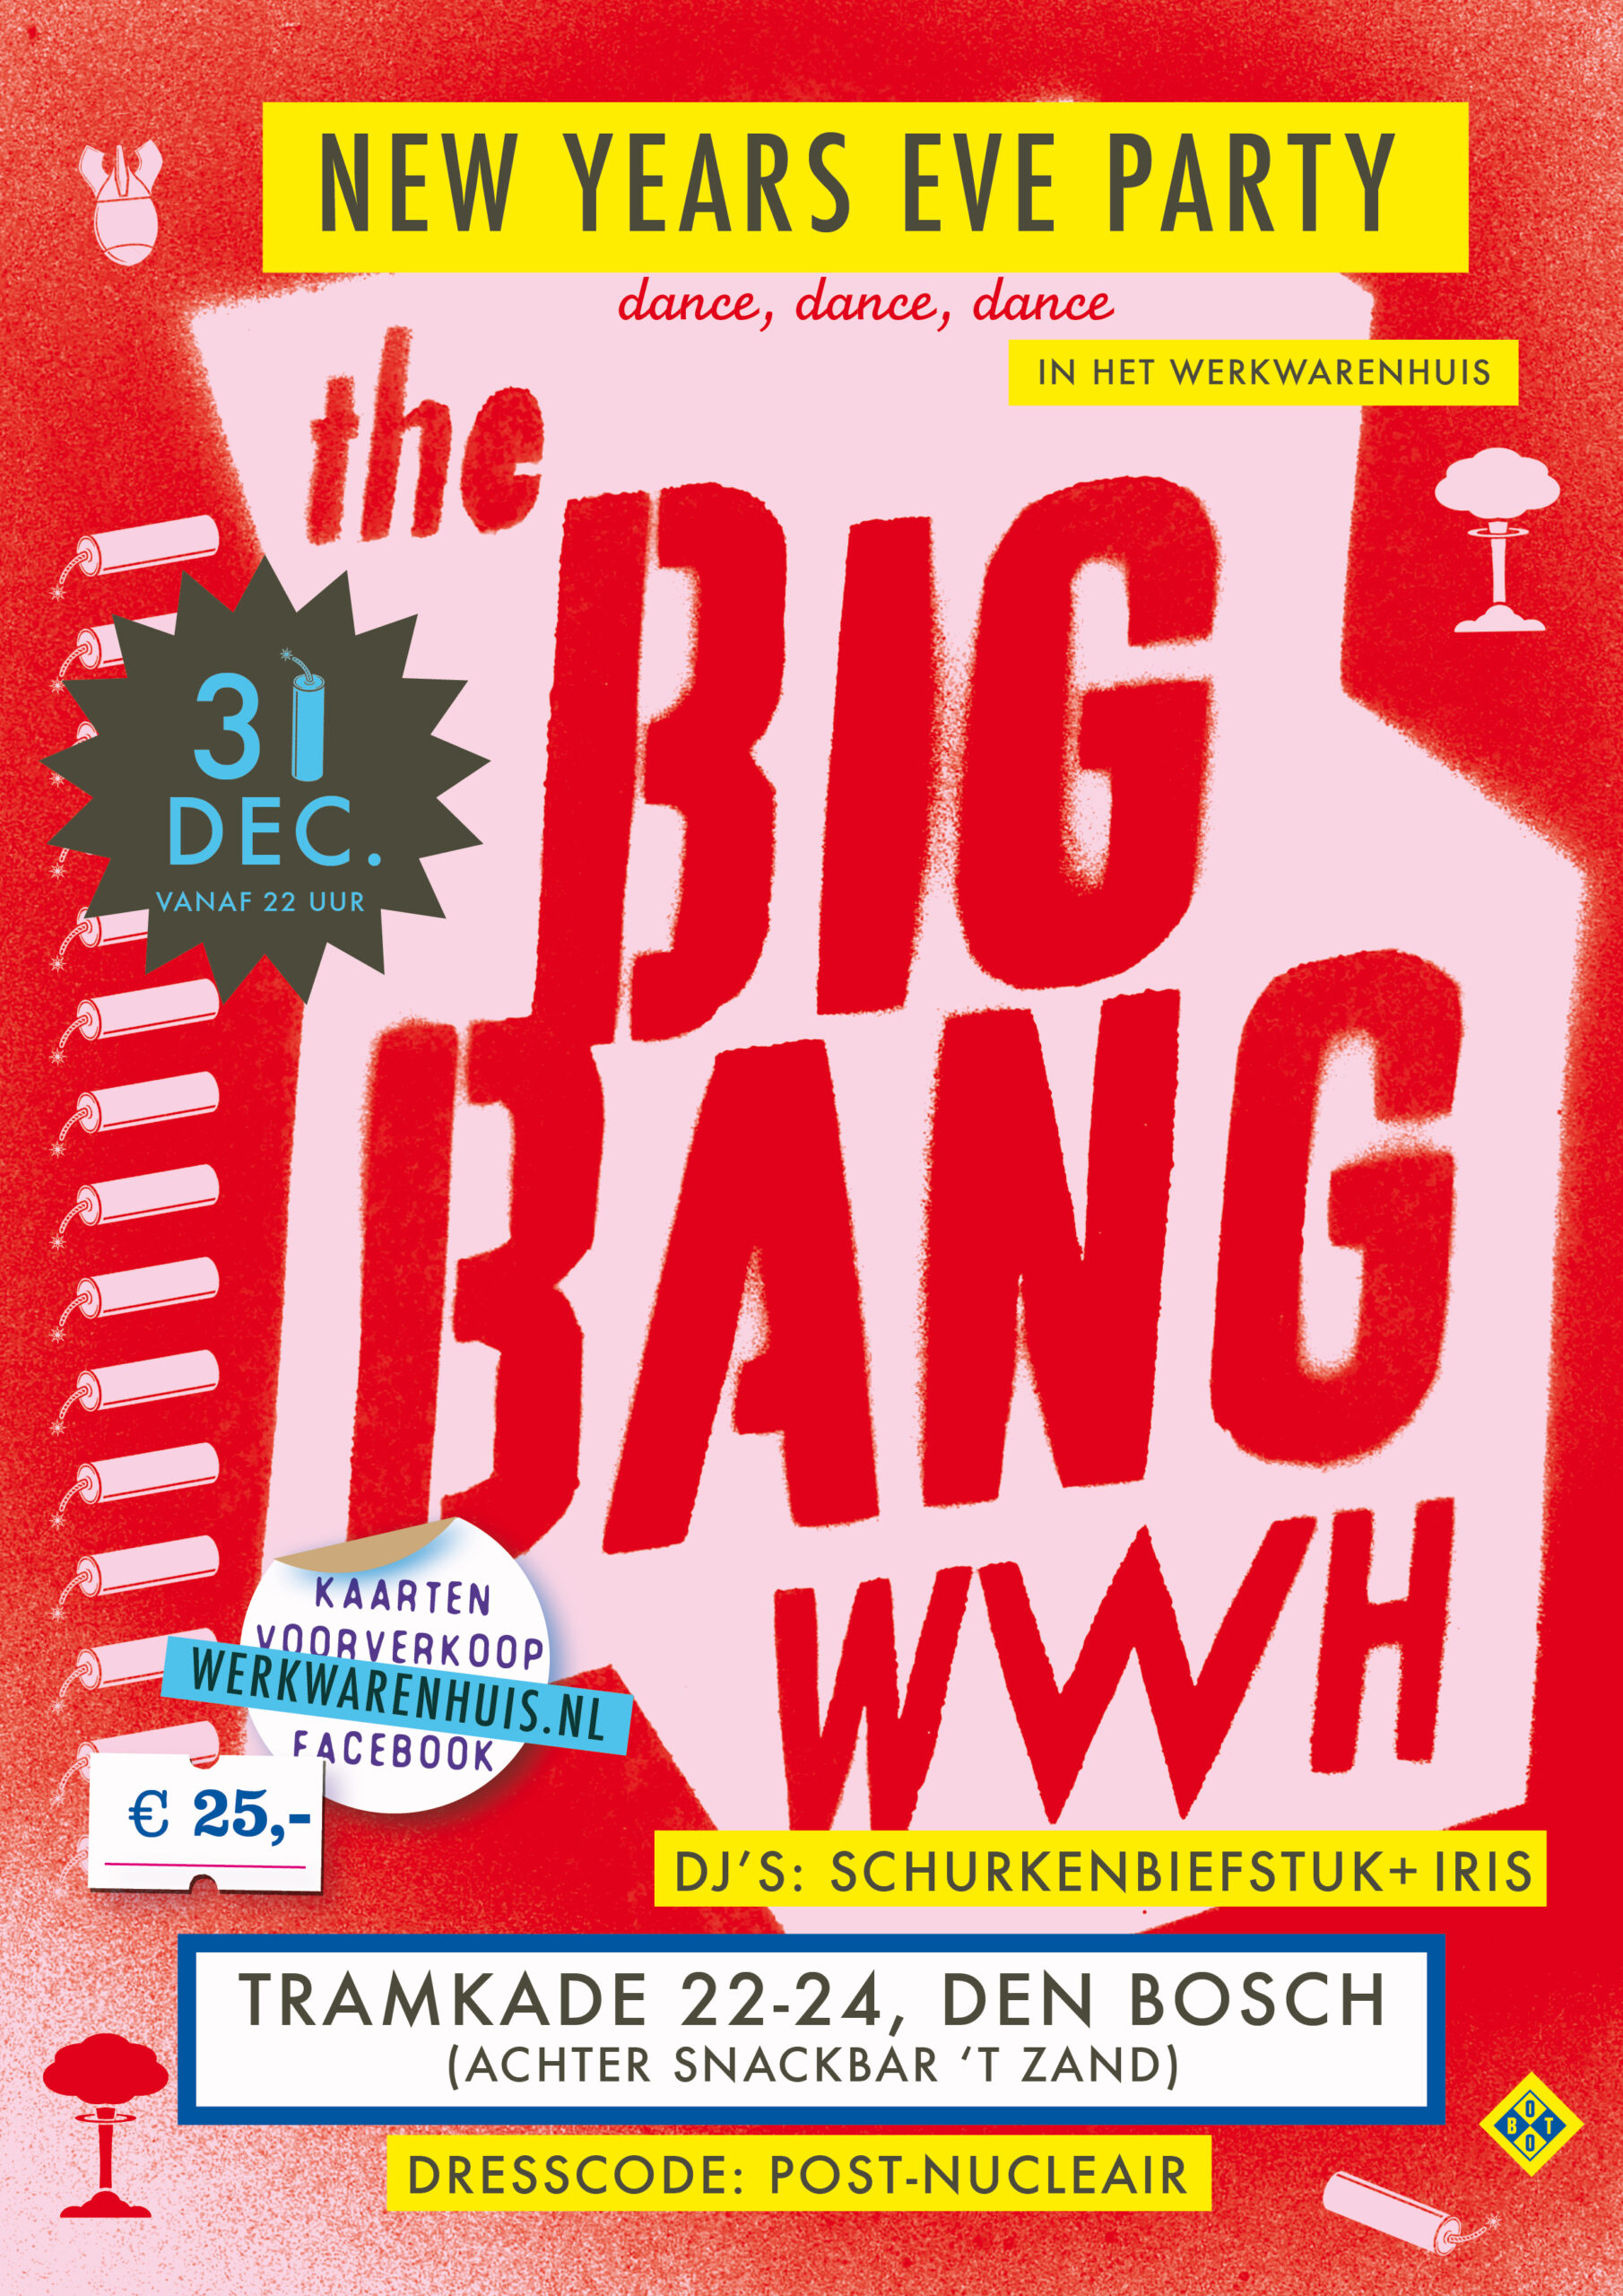 The BIG BANG – New Years Eve Party